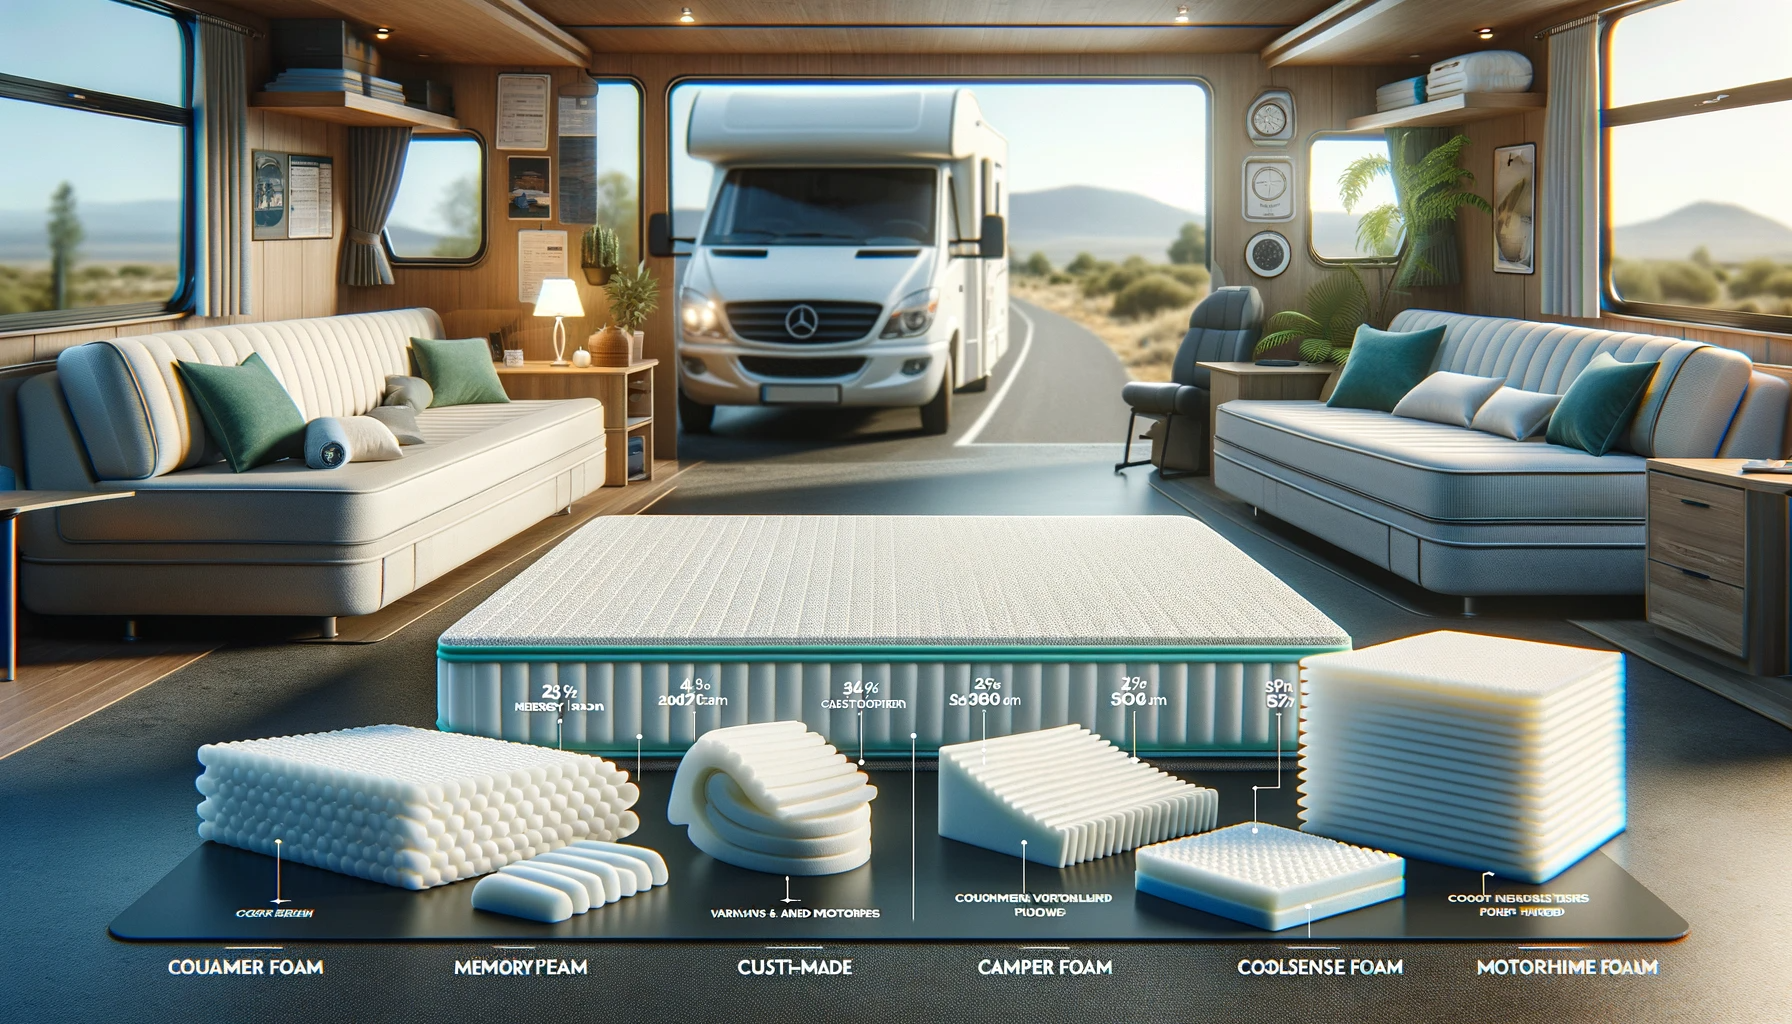 A diverse collection of top-rated mattress toppers, including memory foam, custom-made, and CoolSense foam, showcased in a caravan environment, highlighting their features and benefits for enhancing sleep comfort on the road.